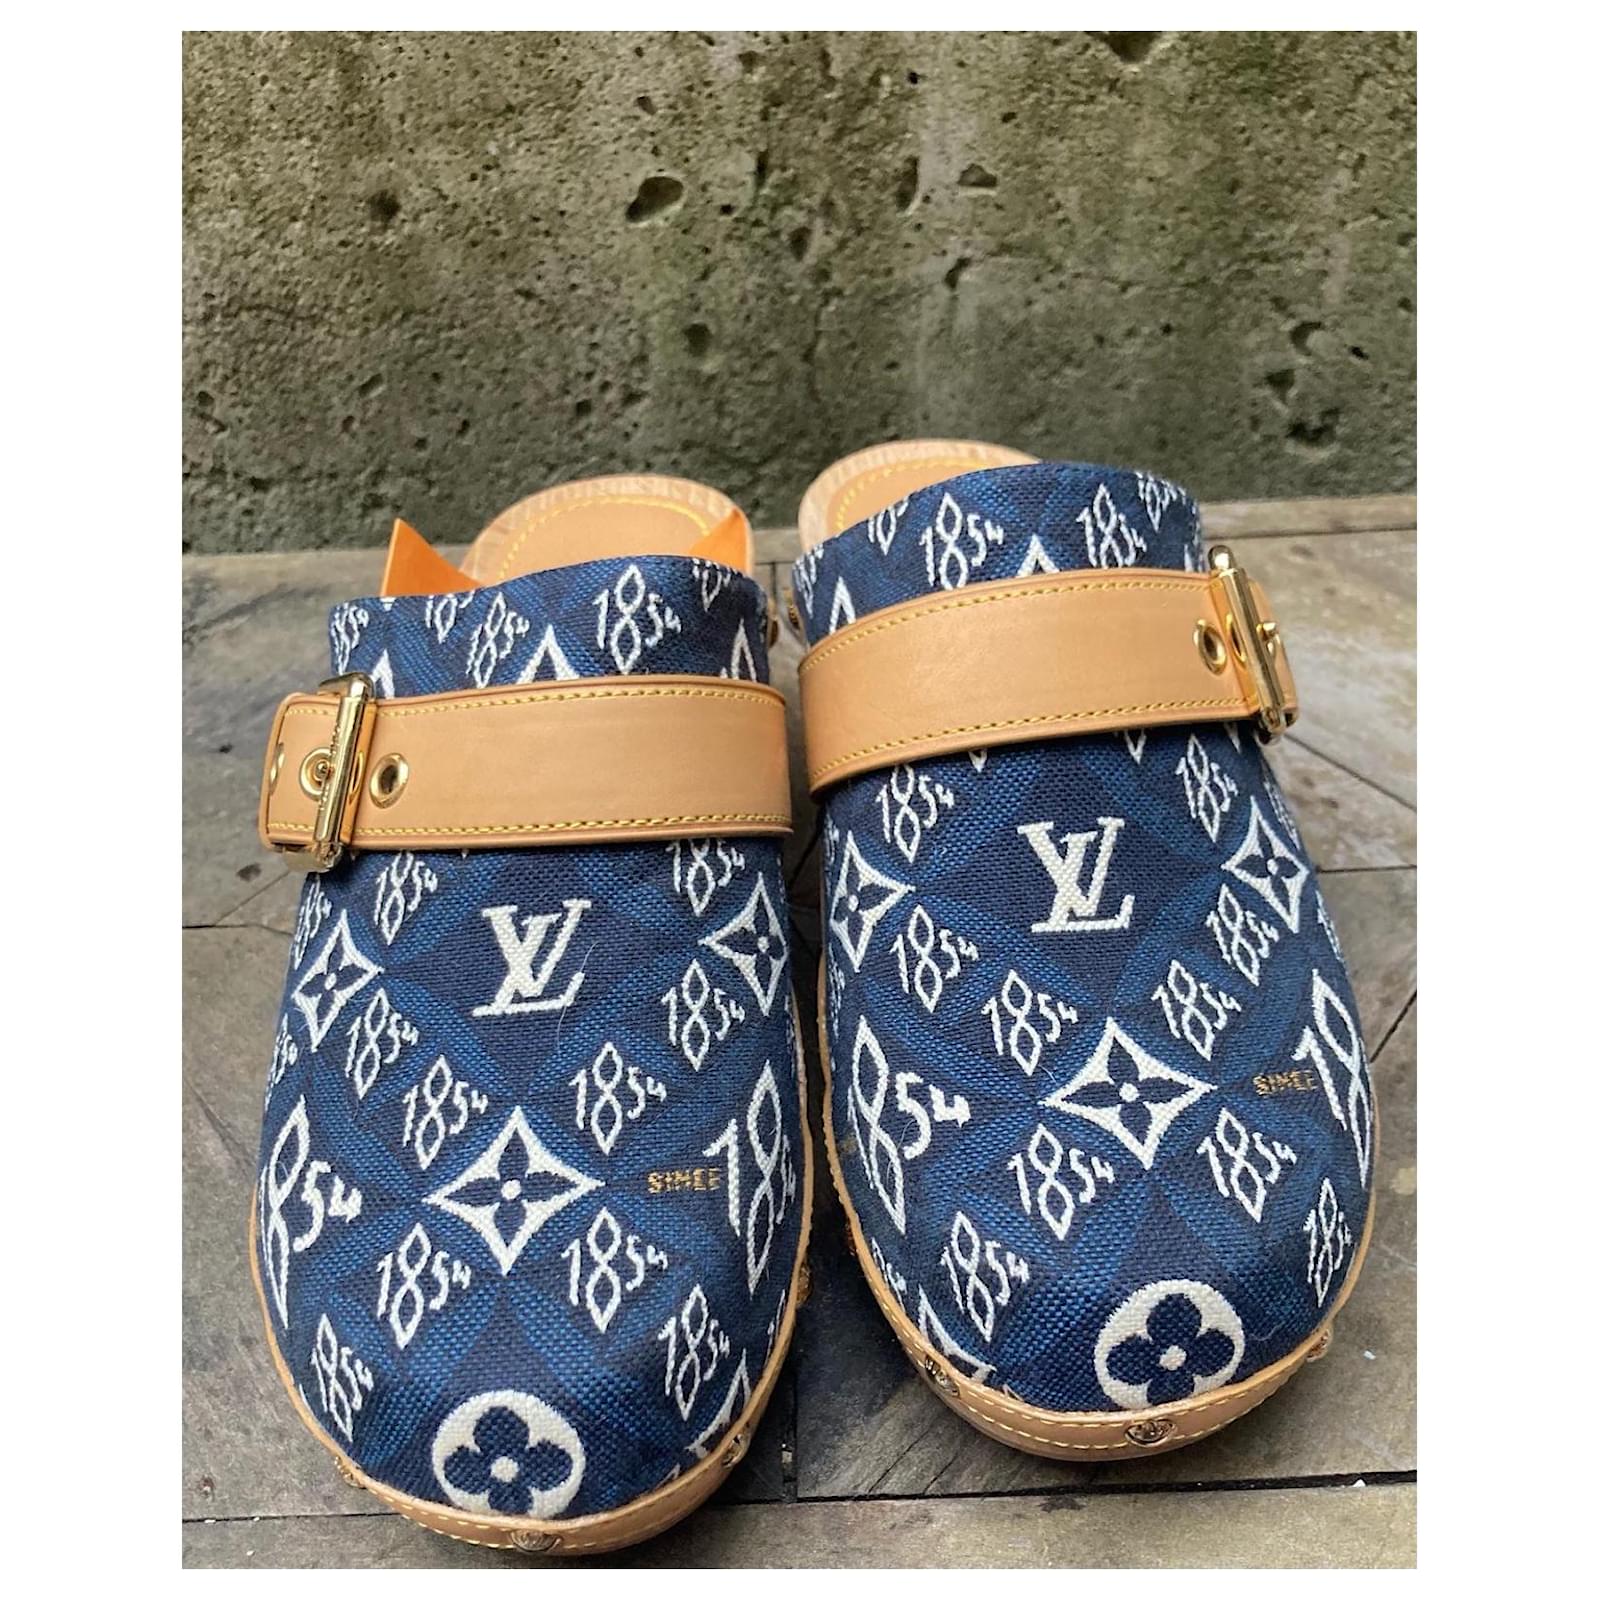 Sublime new Louis Vuitton clogs in box 37 Collection 1854 White Blue ...